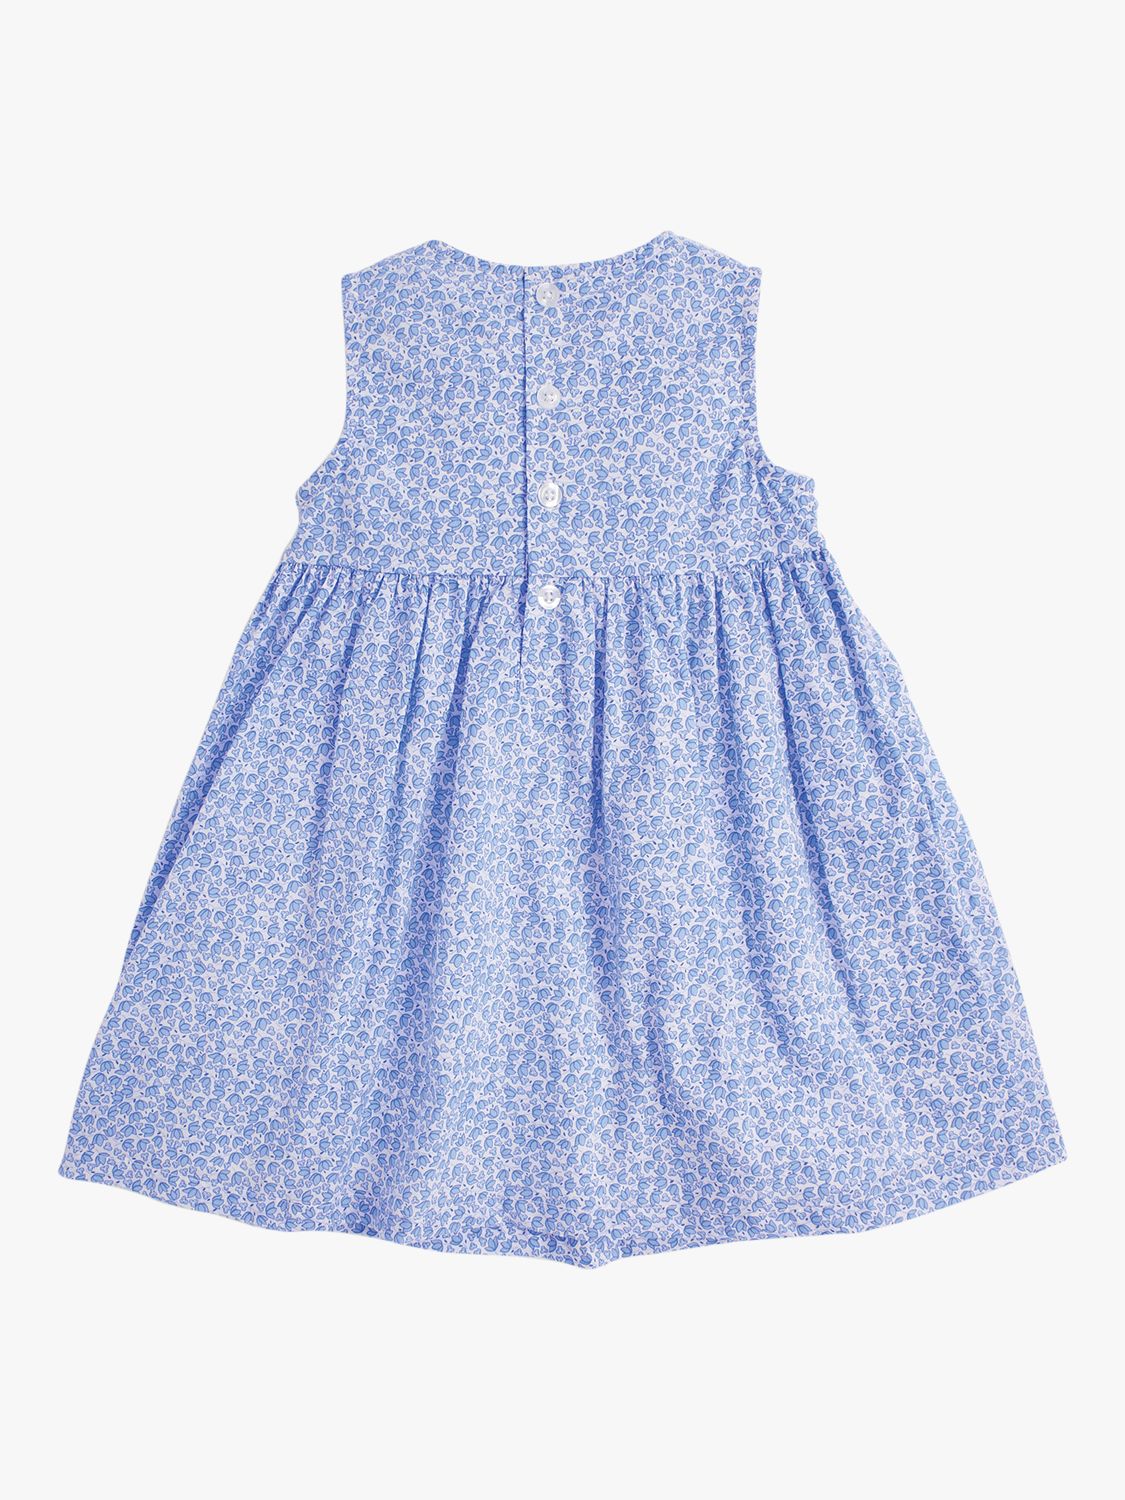 JoJo Maman Bébé Baby Floral Bud Embroidered Smock Dress, Blue, 6-7 years